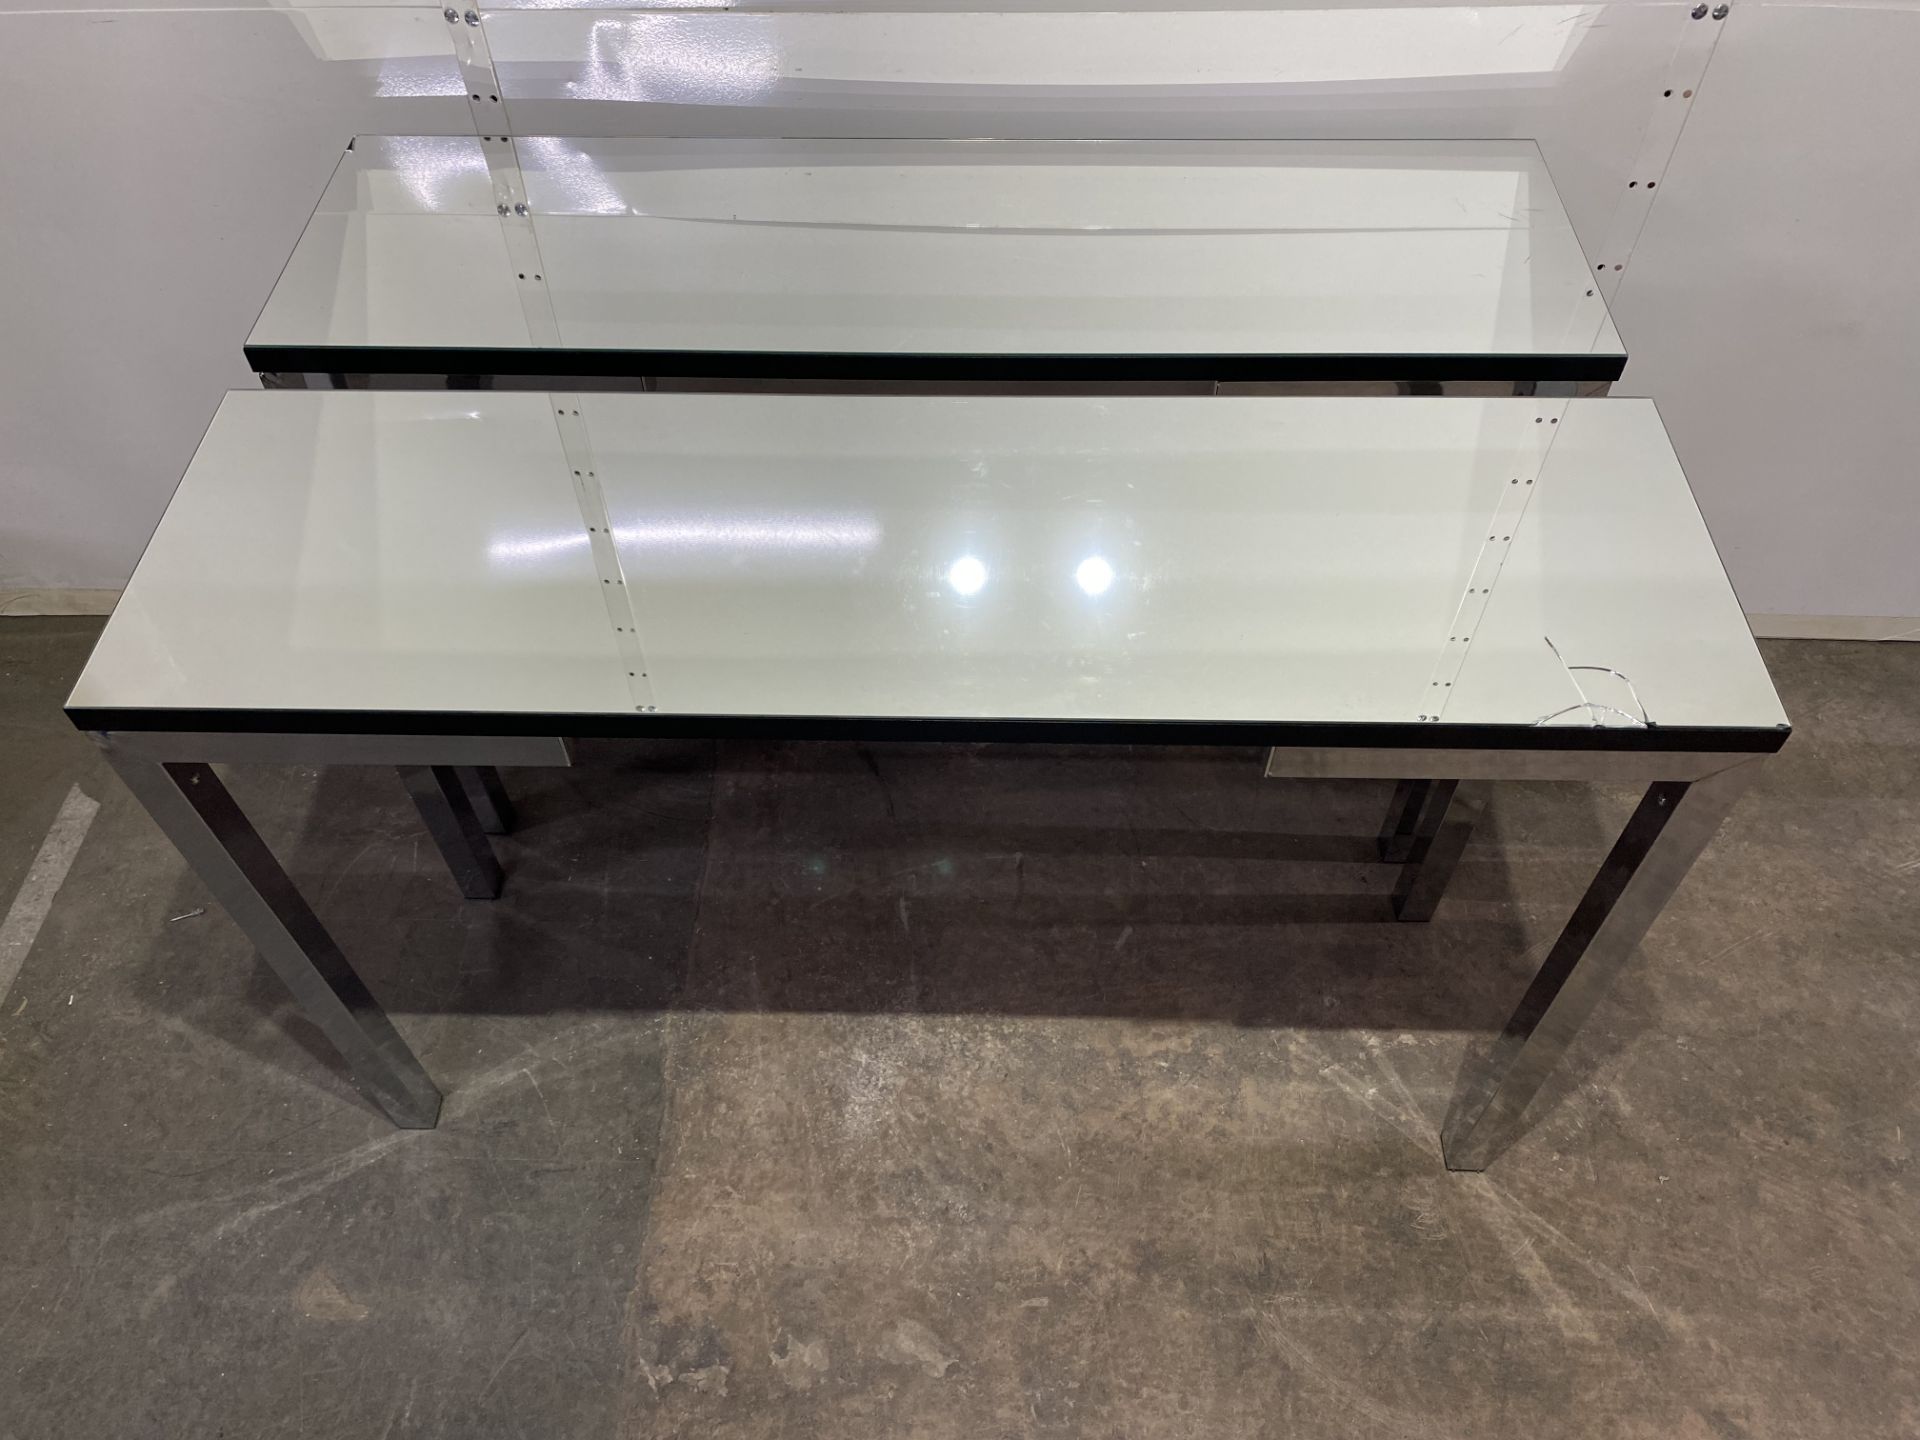 2 x Mirrored Valencia Console Tables w/Black Trim | Damaged - Image 3 of 8